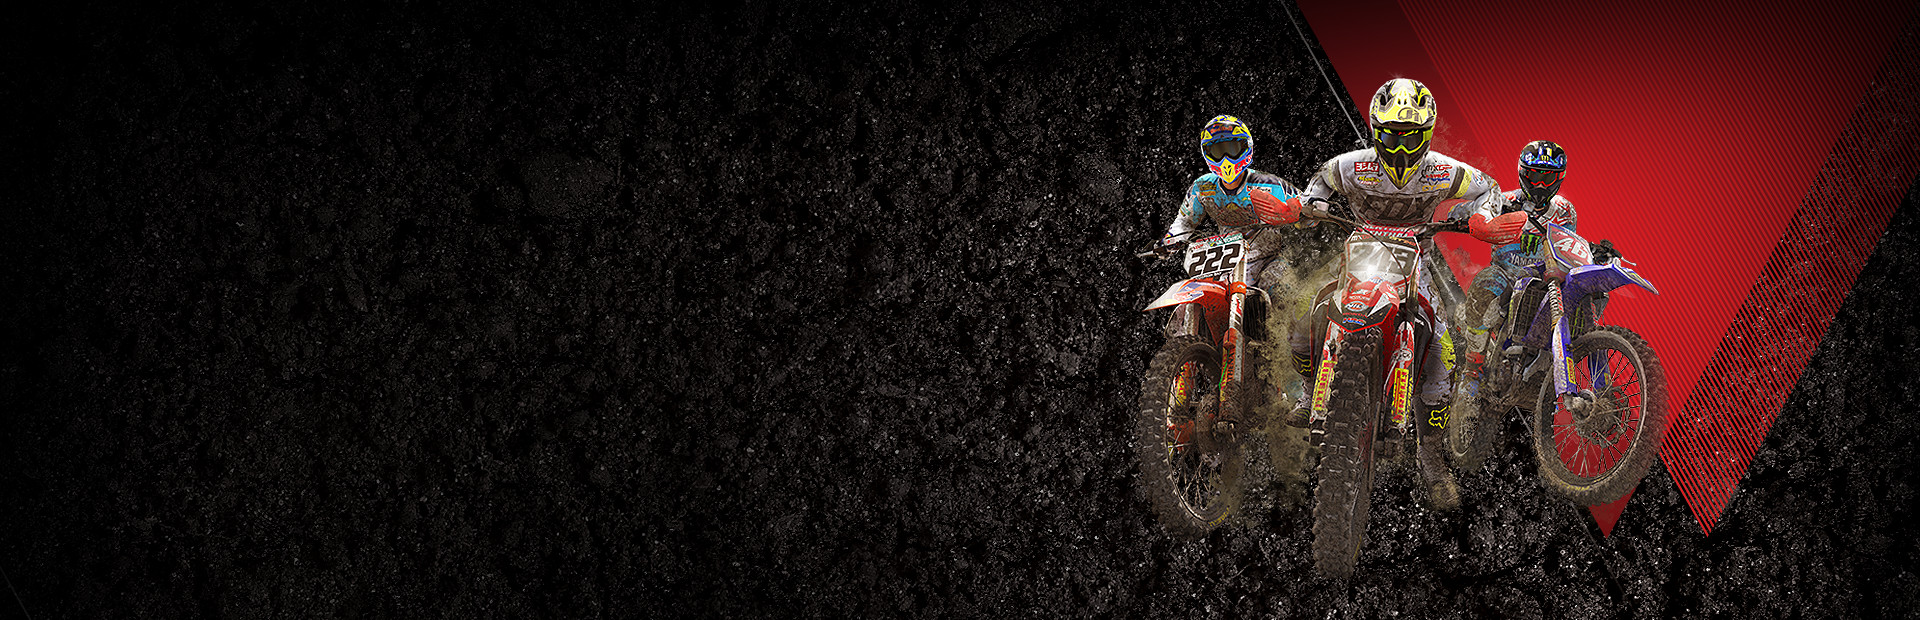 MXGP3 - The Official Motocross Videogame cover image